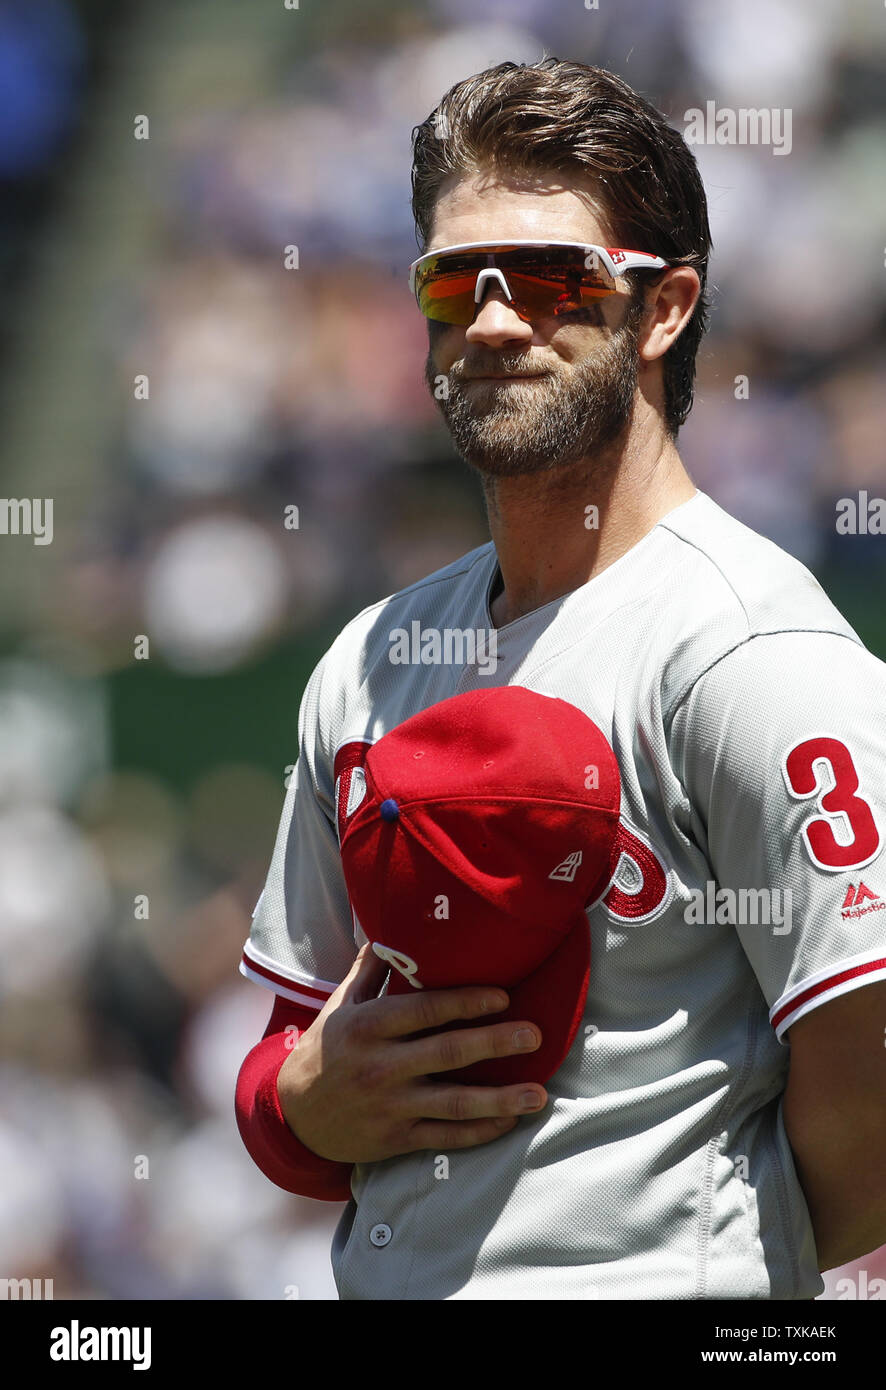 Philadelphia Phillies' Bryce Harper smiles before a baseball game against the Chicago Cubs on May 23, 2019 in Chicago. Photo by Kamil Krzaczynski/UPI Stock Photo